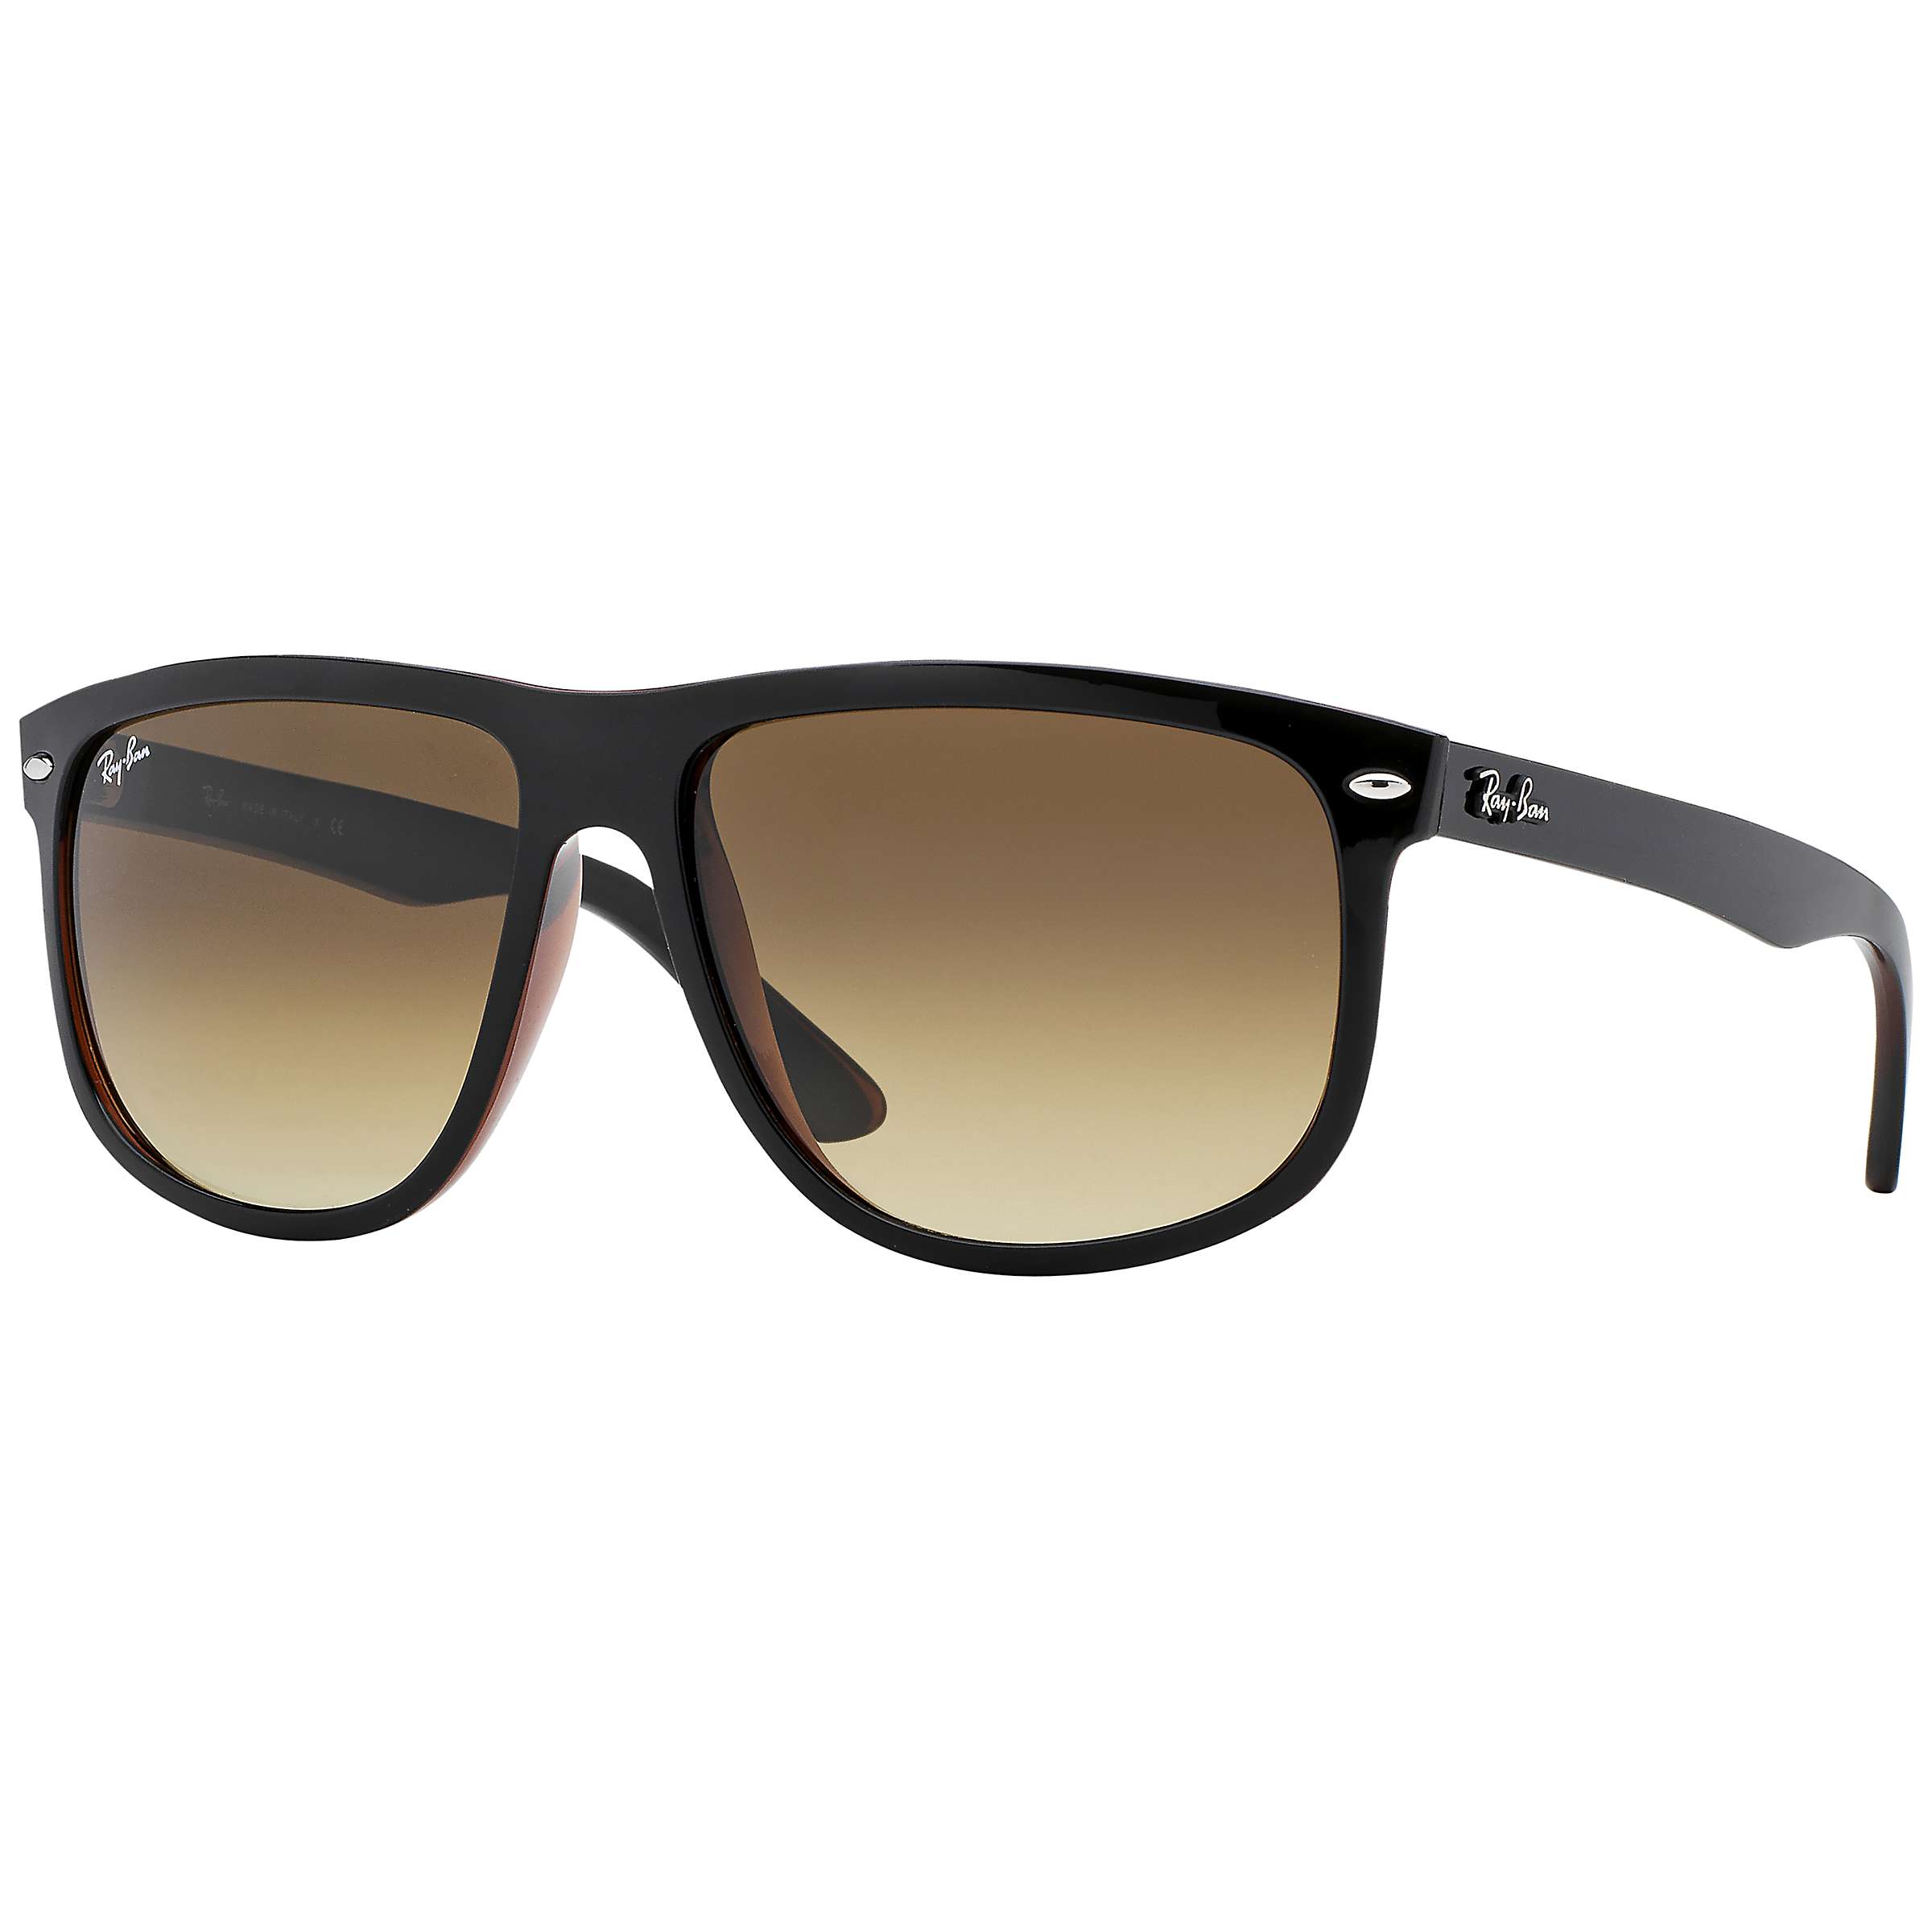 Buy Ray-Ban RB4147 Men's Square Sunglasses Online at johnlewis.com